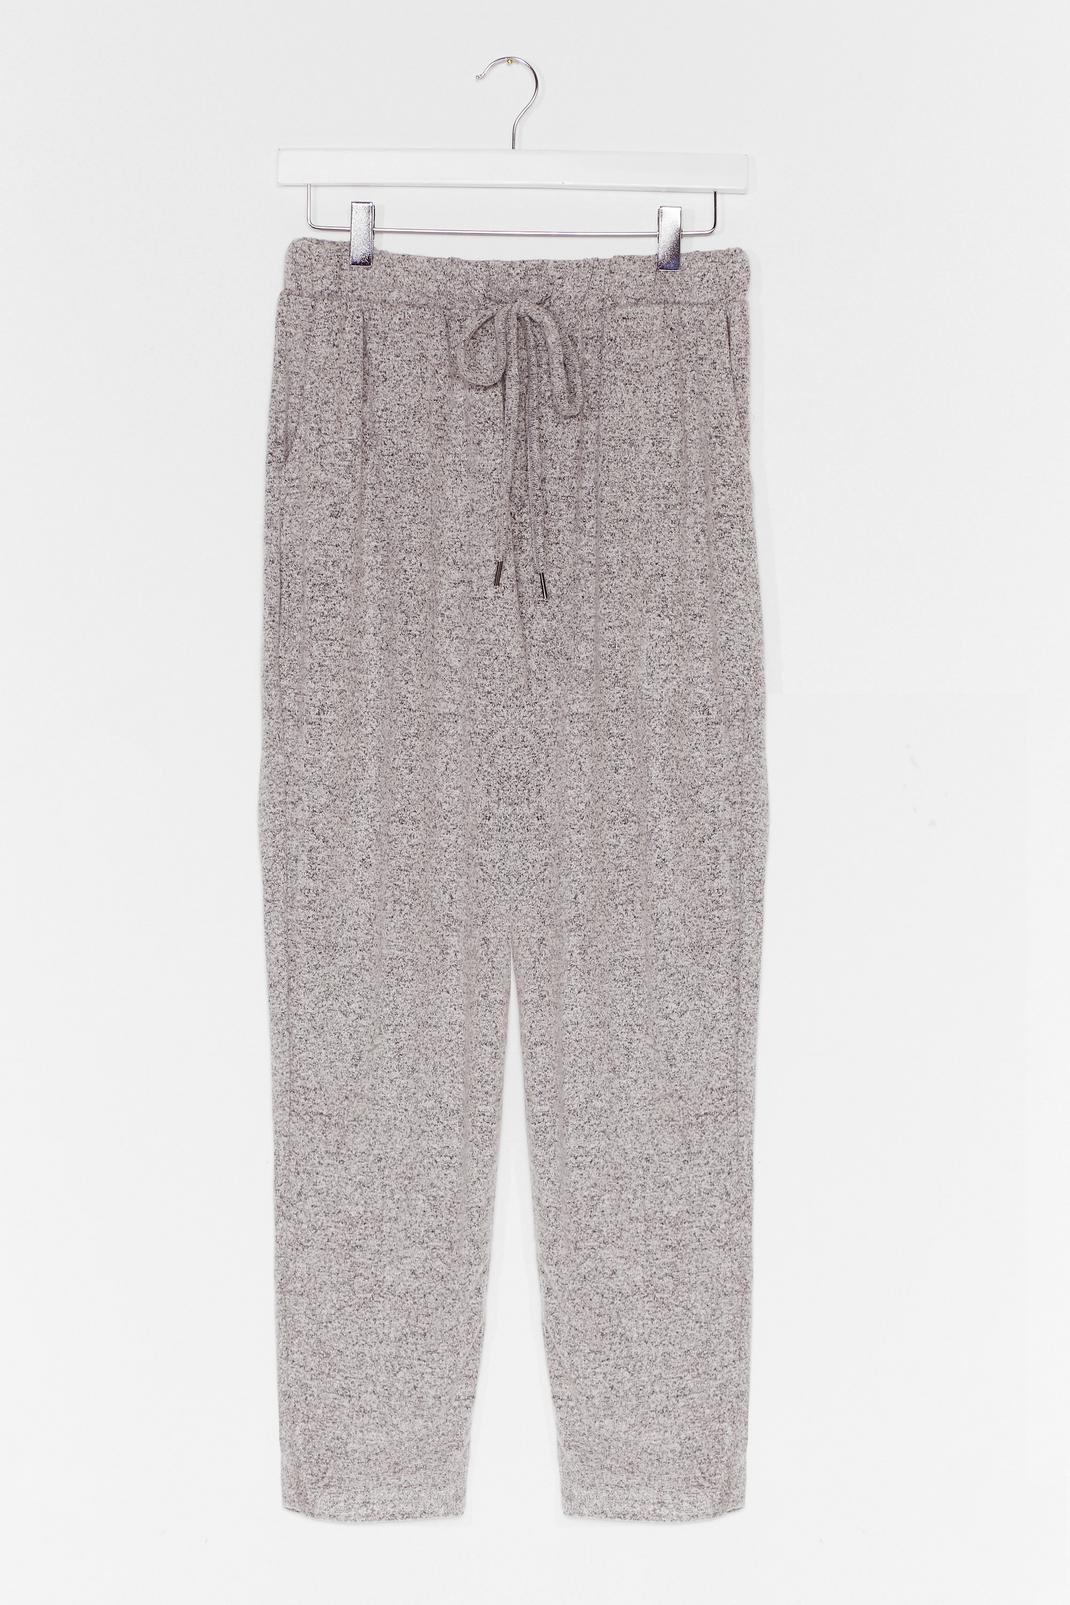 Grey Marl Slouchy Loungewear Joggers image number 1